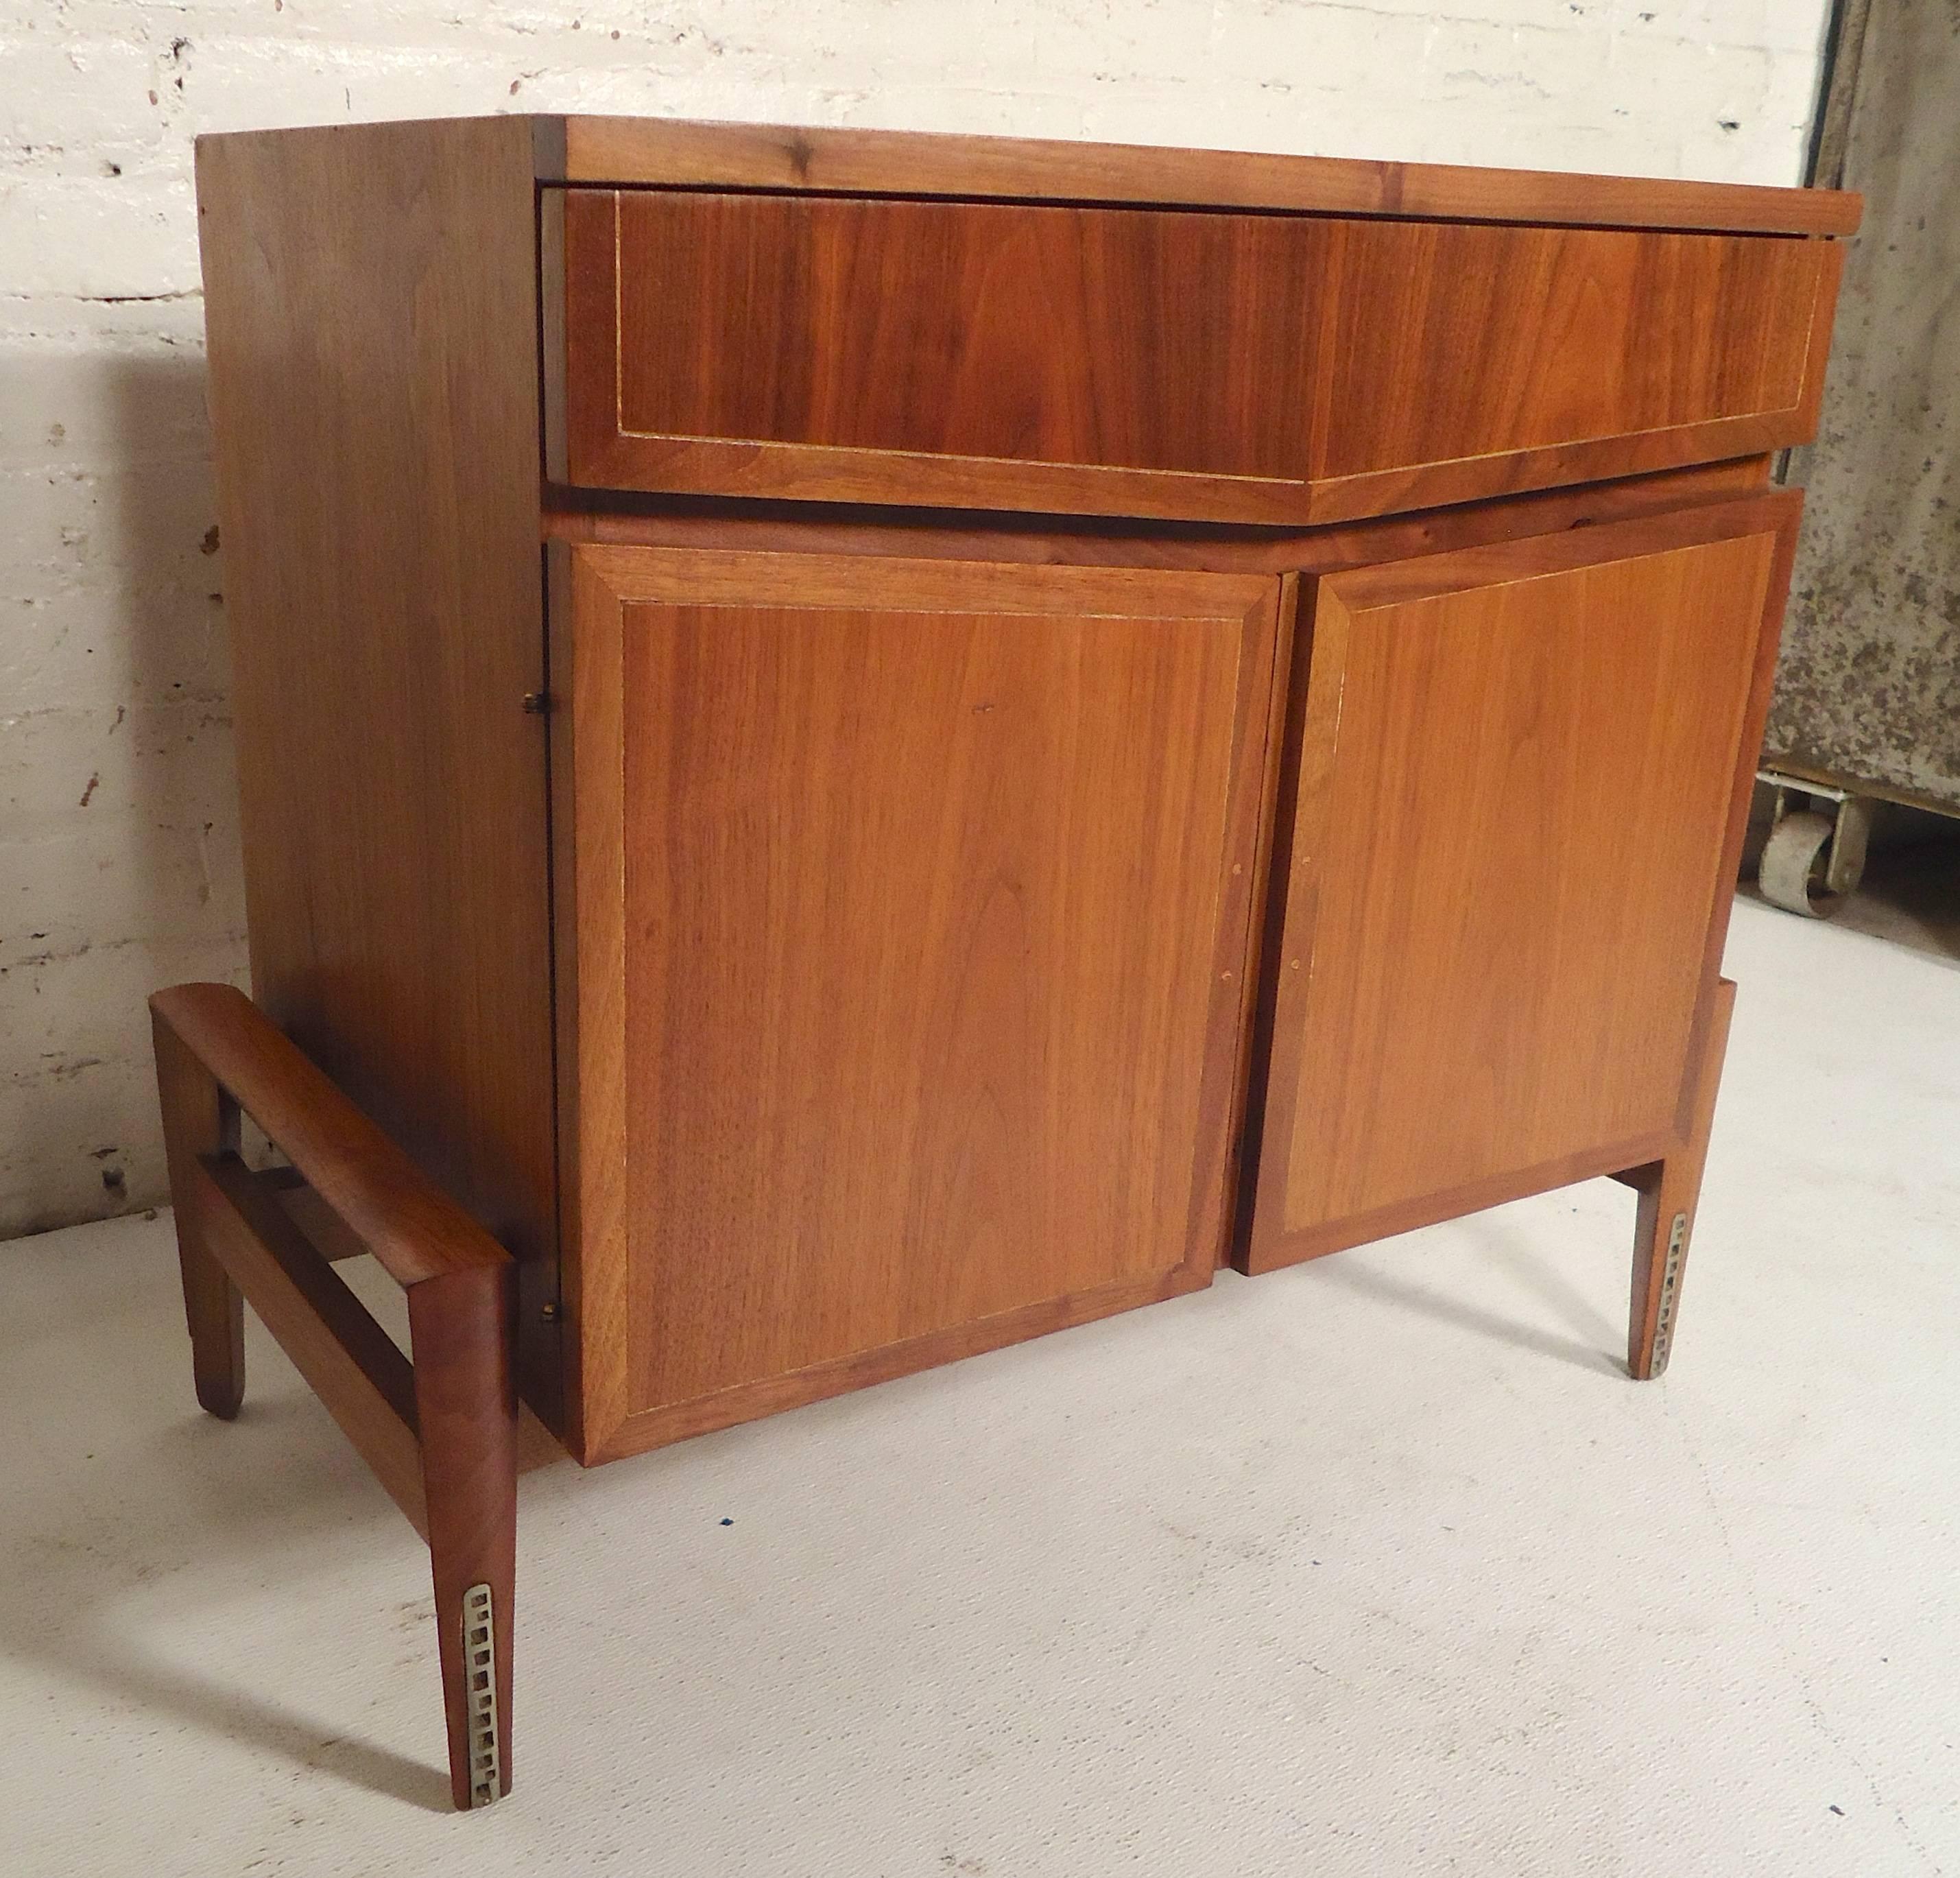 Unusual vintage cabinet with drawer and cabinet storage. Inlaid trim around the front. 

(Please confirm item location - NY or NJ - with dealer).
 